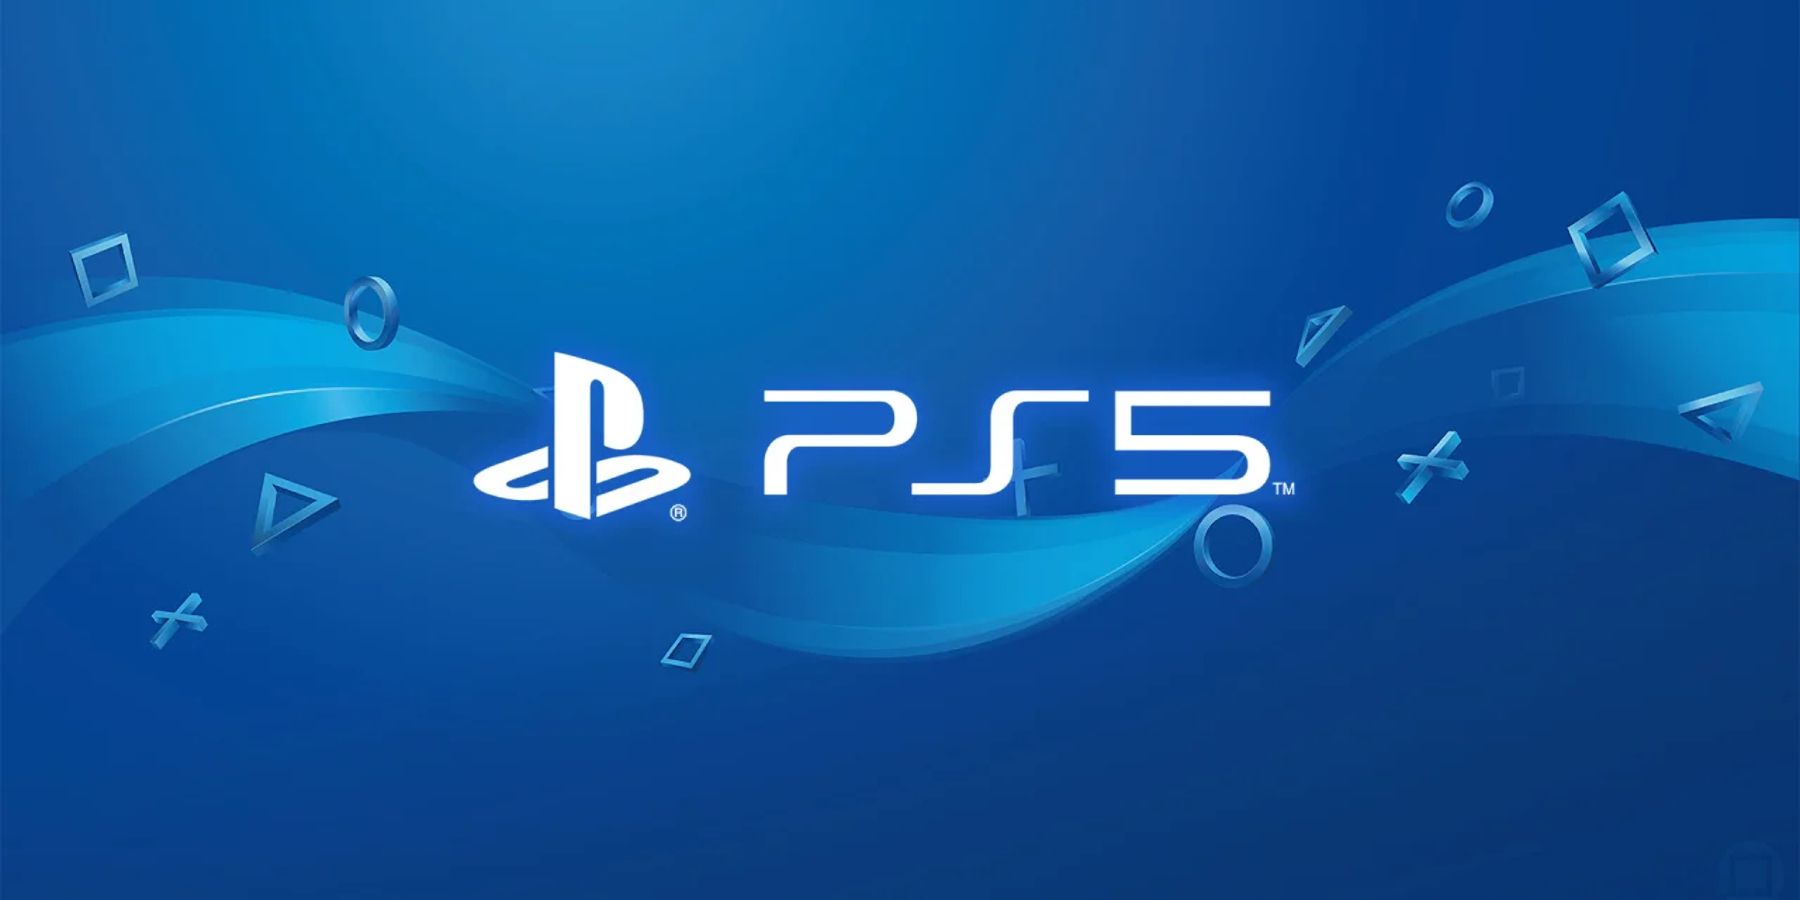 PS5 could start showing ads in free-to-play games